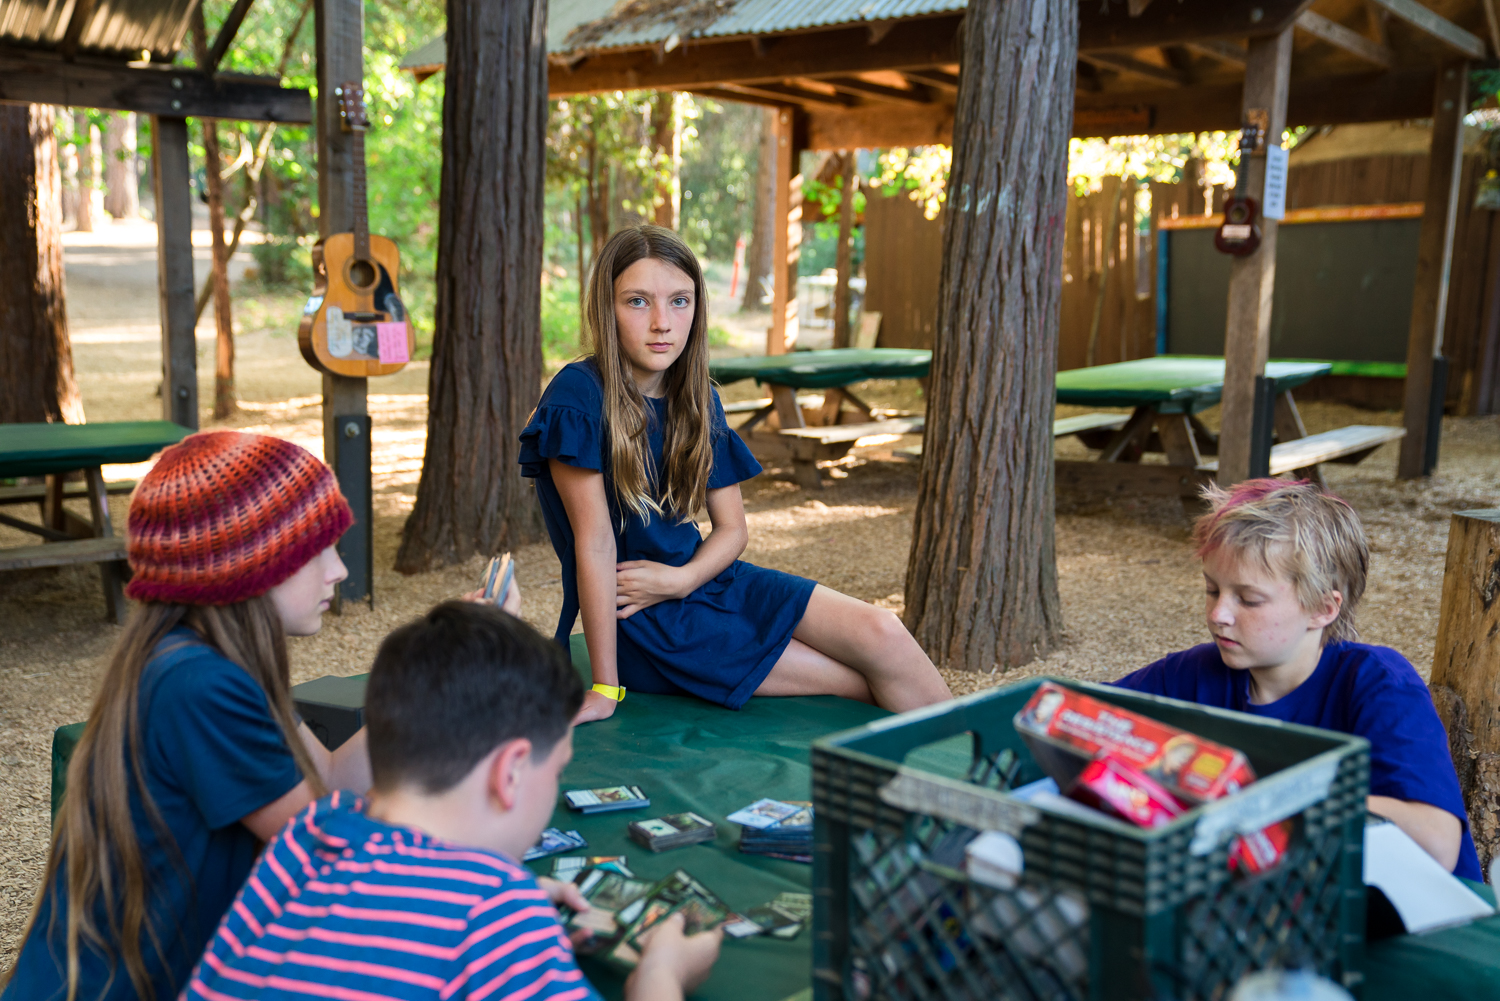 A girl sits on a picnic table where three boys are playing a card game.